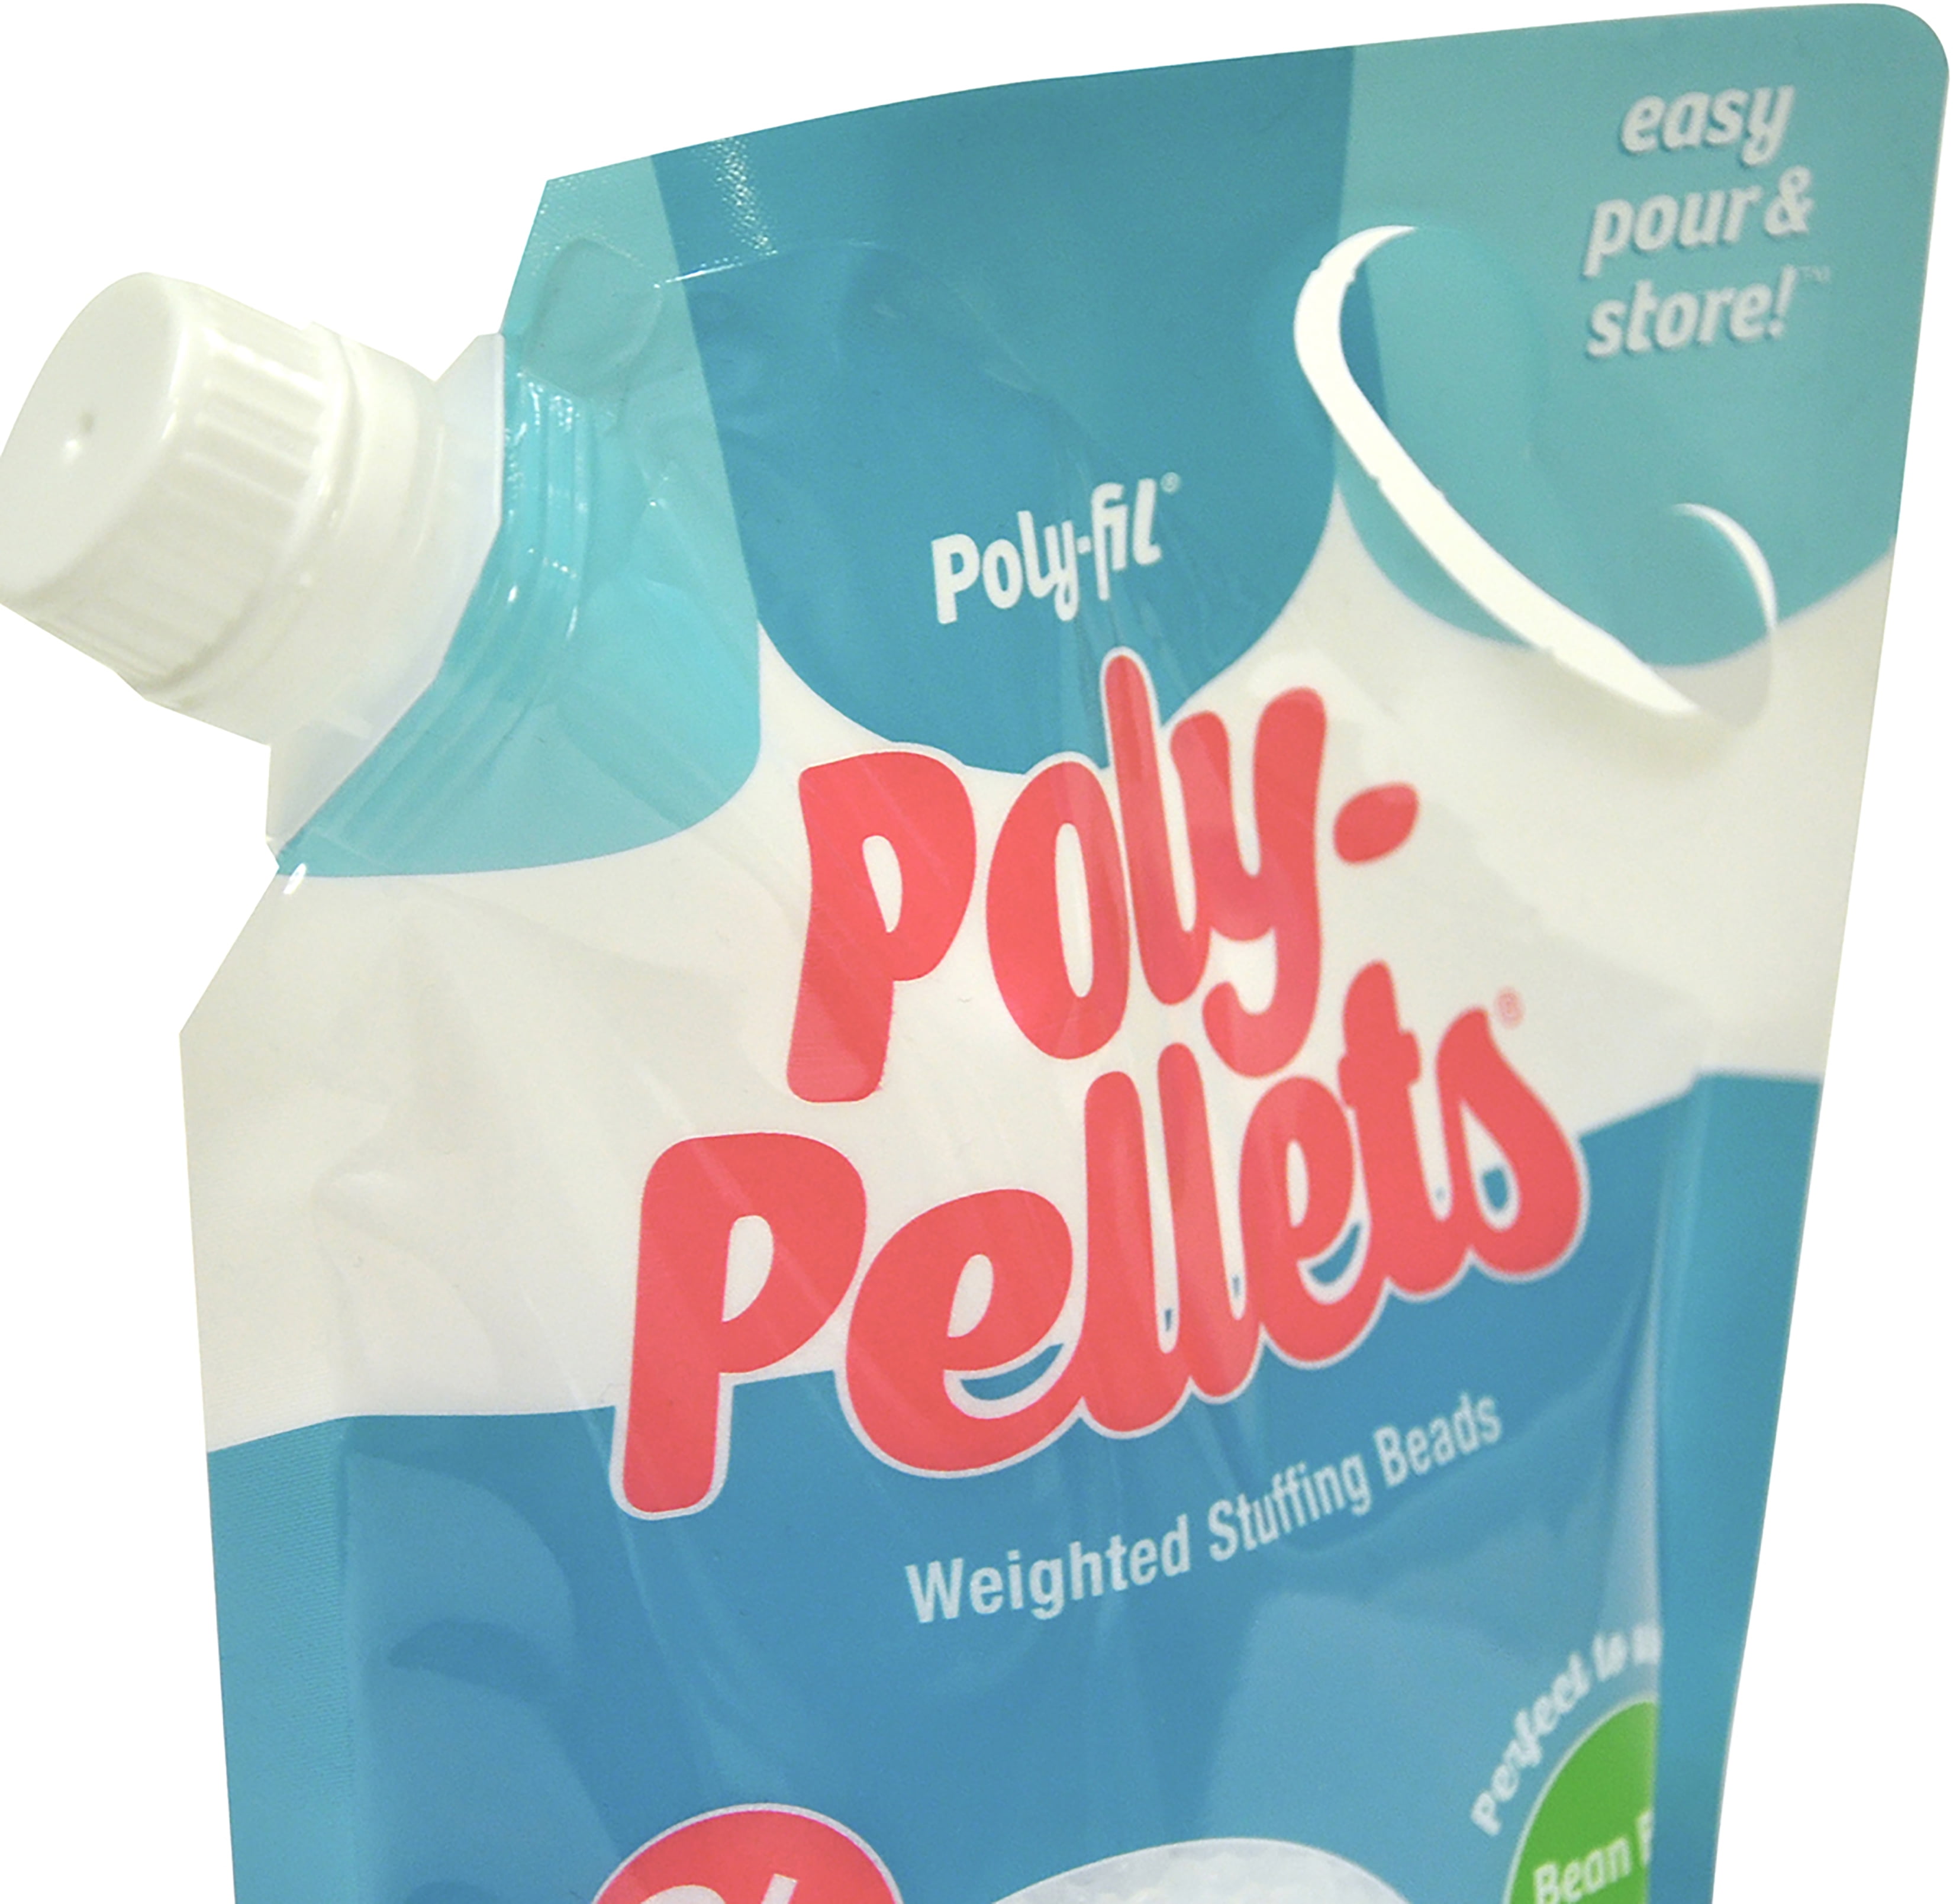 Poly-Fil Poly Pellets Weighted Stuffing Beads | 10 lb Box